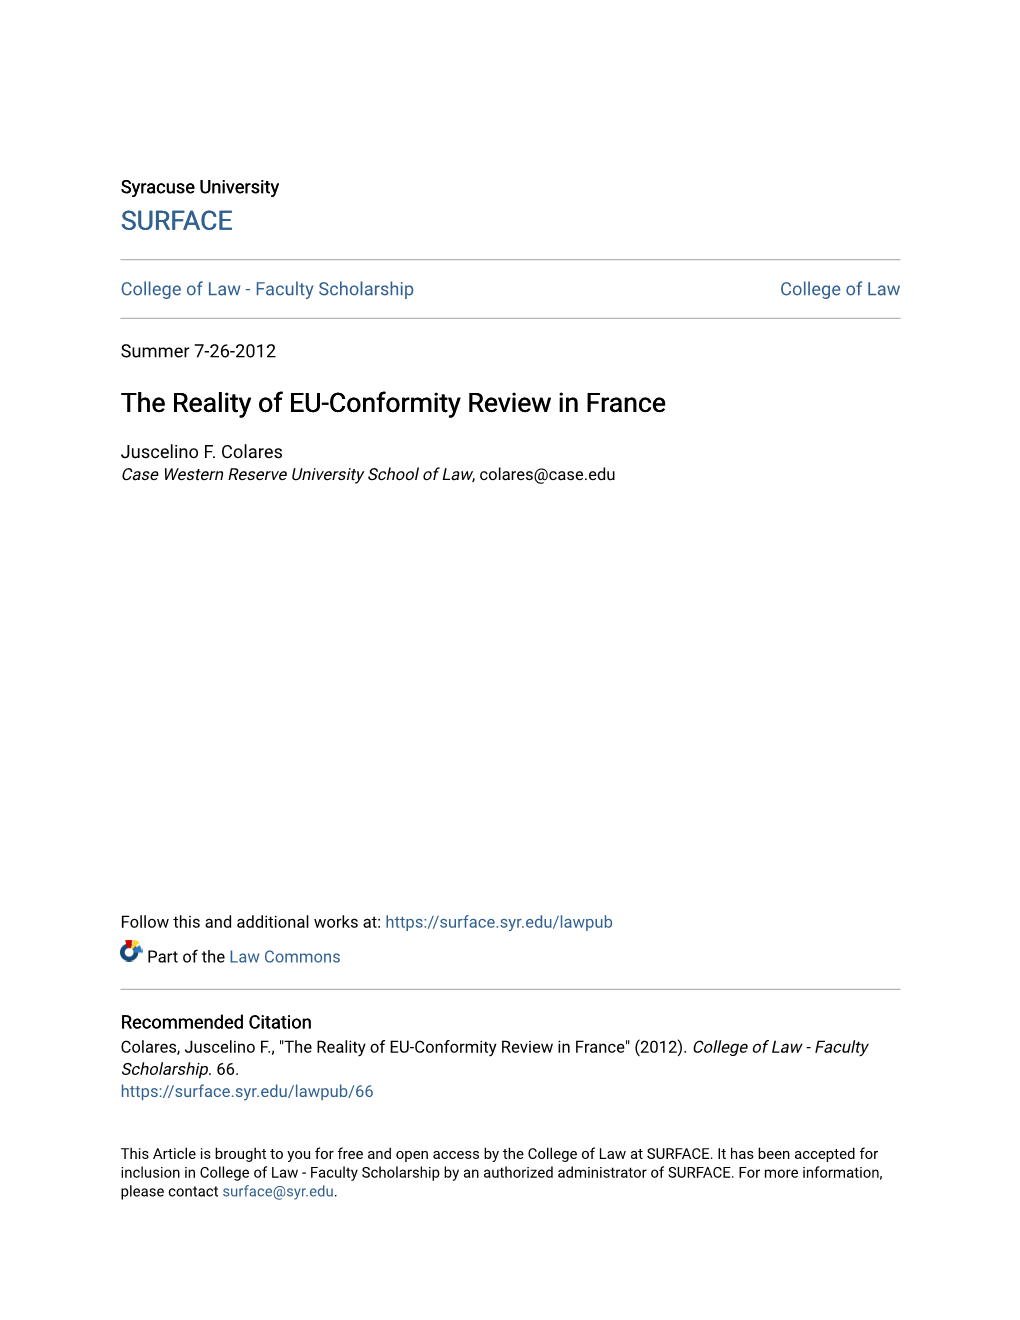 The Reality of EU-Conformity Review in France